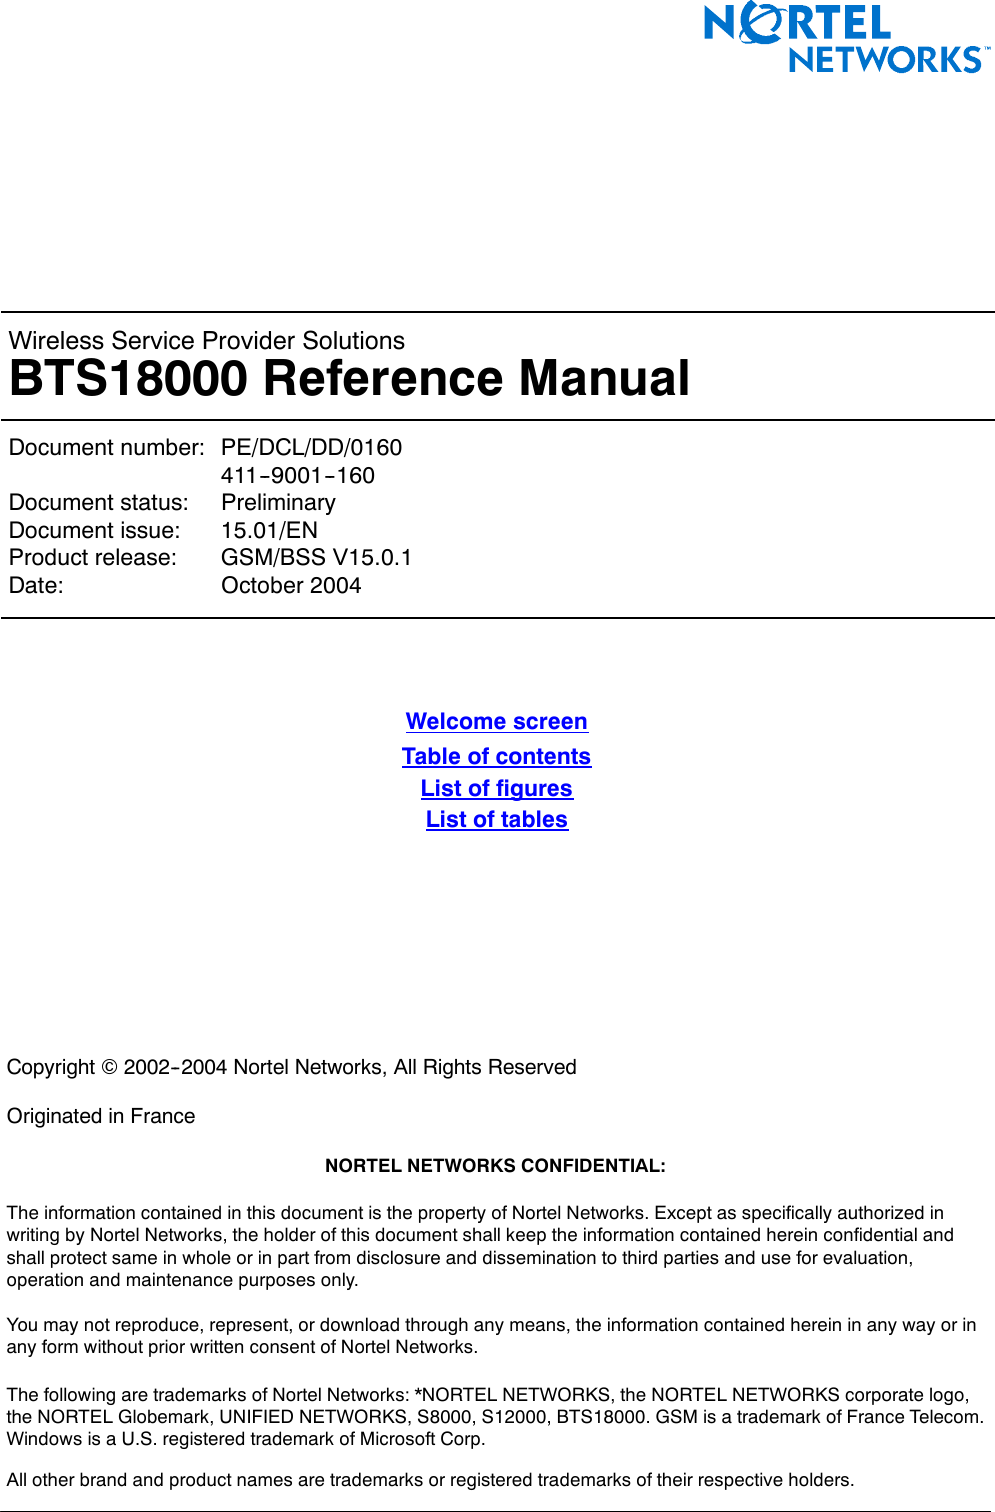 &lt; 142 &gt; : BTS18000 Reference ManualWireless Service Provider SolutionsBTS18000 Reference ManualDocument number: PE/DCL/DD/0160411--9001--160Document status: PreliminaryDocument issue: 15.01/ENProduct release: GSM/BSS V15.0.1Date: October 2004Welcome screenTable of contentsList of figuresList of tablesCopyright ©2002--2004 Nortel Networks, All Rights ReservedOriginated in FranceNORTEL NETWORKS CONFIDENTIAL:The information contained in this document is the property of Nortel Networks. Except as specifically authorized inwriting by Nortel Networks, the holder of this document shall keep the information contained herein confidential andshall protect same in whole or in part from disclosure and dissemination to third parties and use for evaluation,operation and maintenance purposes only.You may not reproduce, represent, or download through any means, the information contained herein in any way or inany form without prior written consent of Nortel Networks.The following are trademarks of Nortel Networks: *NORTEL NETWORKS, the NORTEL NETWORKS corporate logo,the NORTEL Globemark, UNIFIED NETWORKS, S8000, S12000, BTS18000. GSM is a trademark of France Telecom.Windows is a U.S. registered trademark of Microsoft Corp.All other brand and product names are trademarks or registered trademarks of their respective holders.